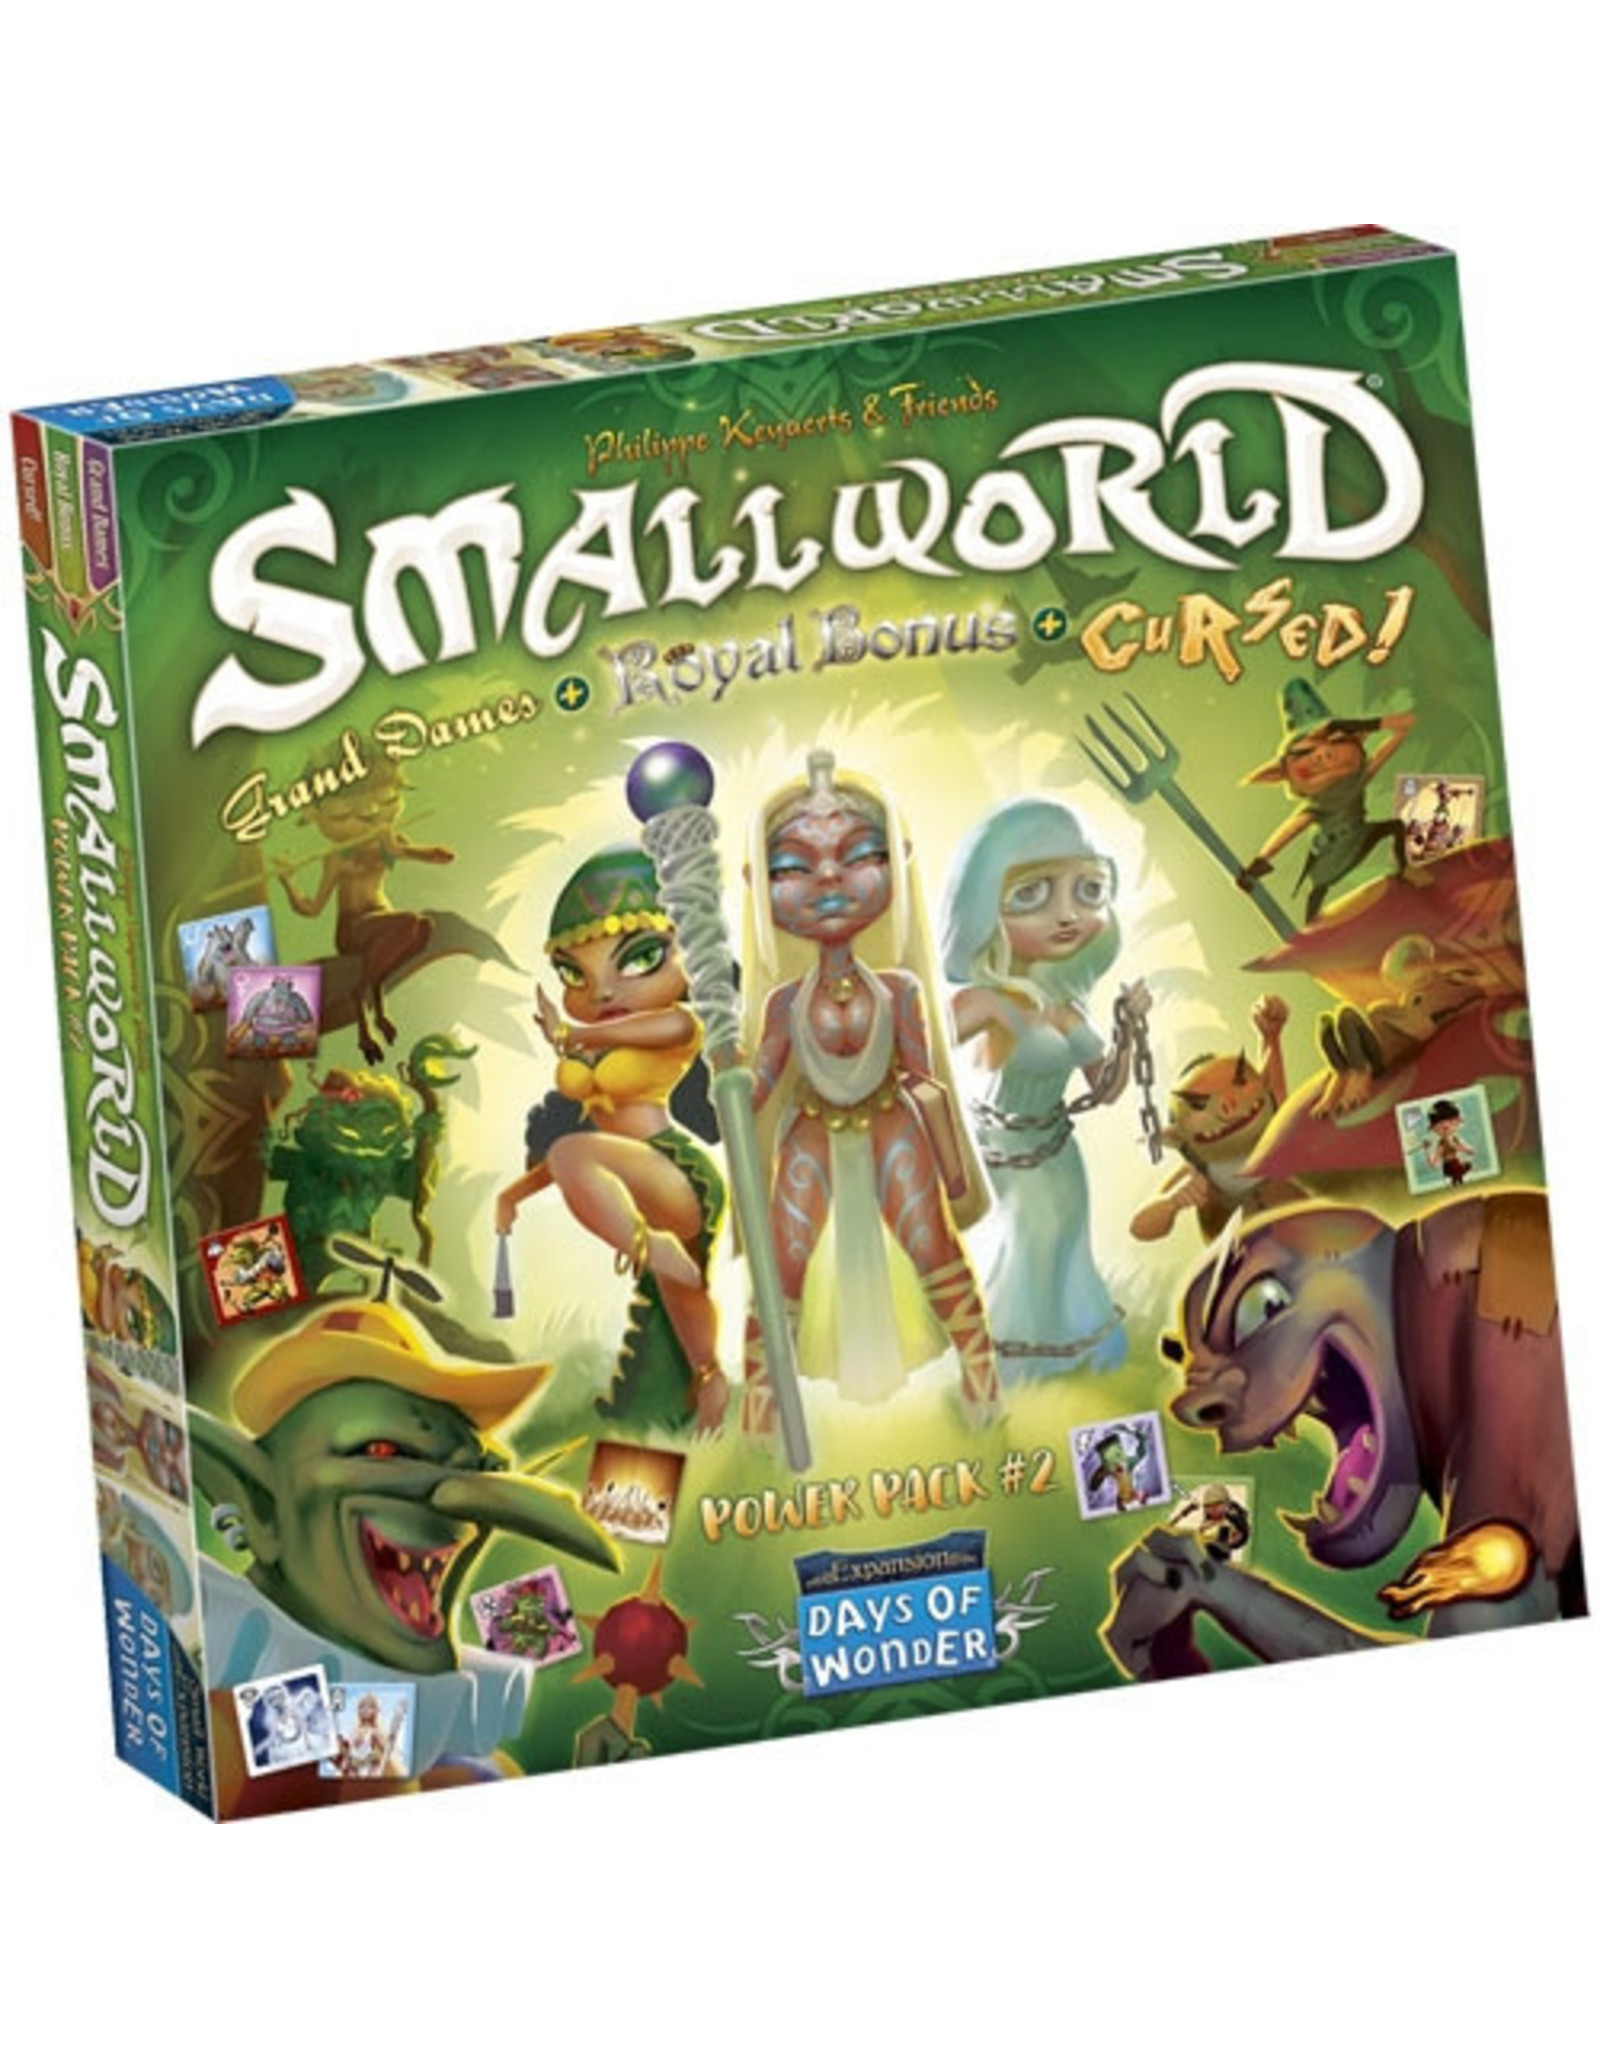 DAYS OF WONDER Small World: Power Pack # 2 Expansion